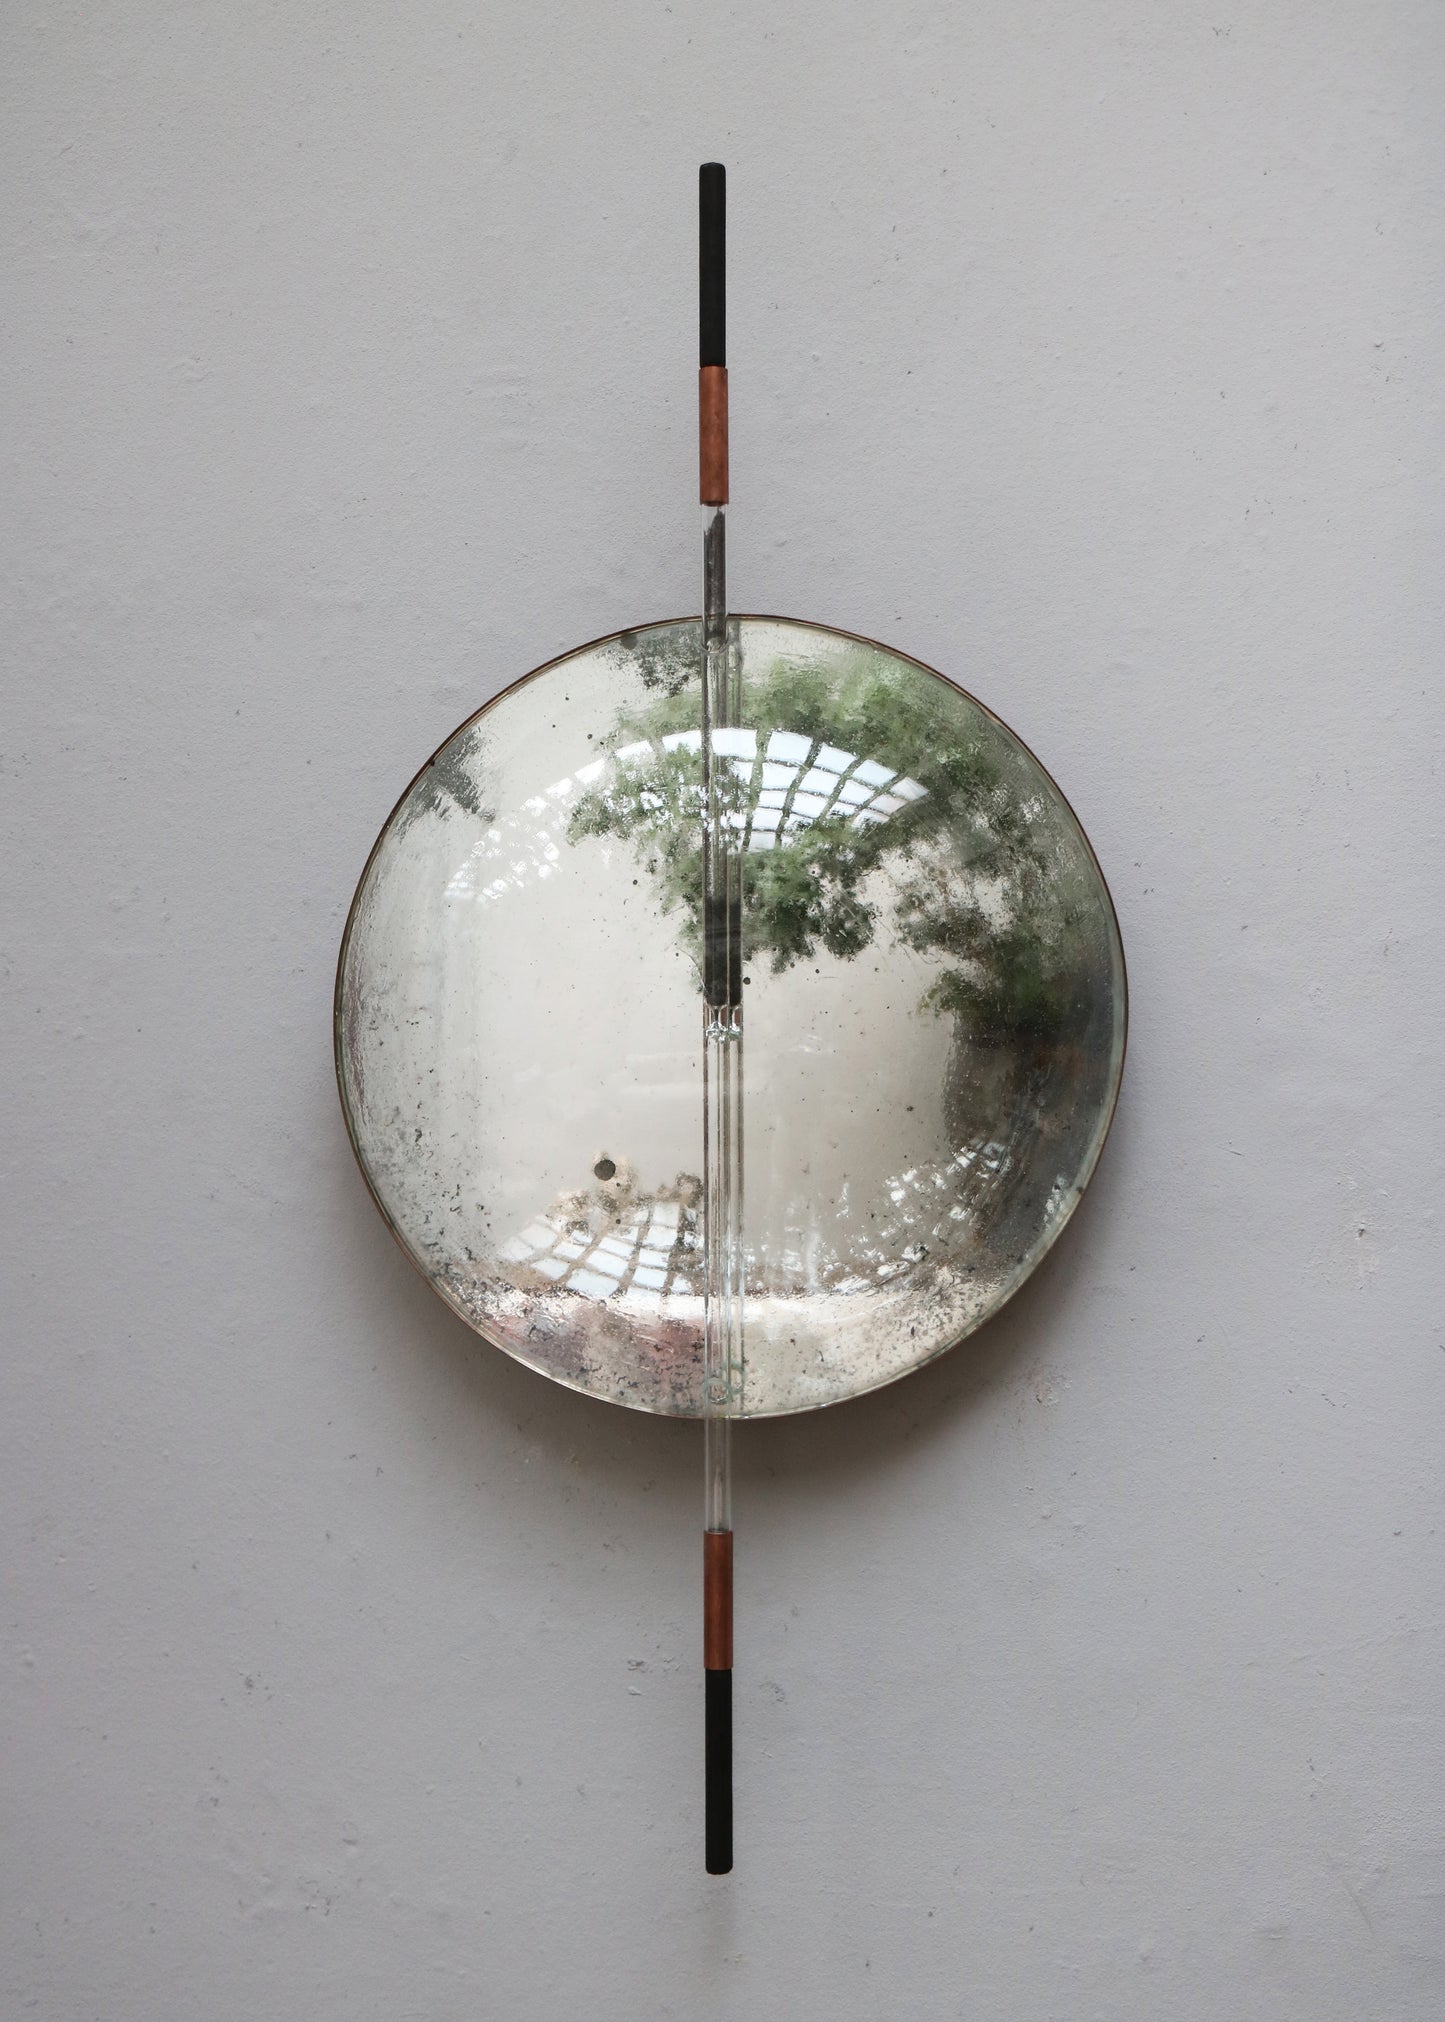 Embrace Melancholy – the Mirror/Hourglass by Nel Verbeke for Brut Collective